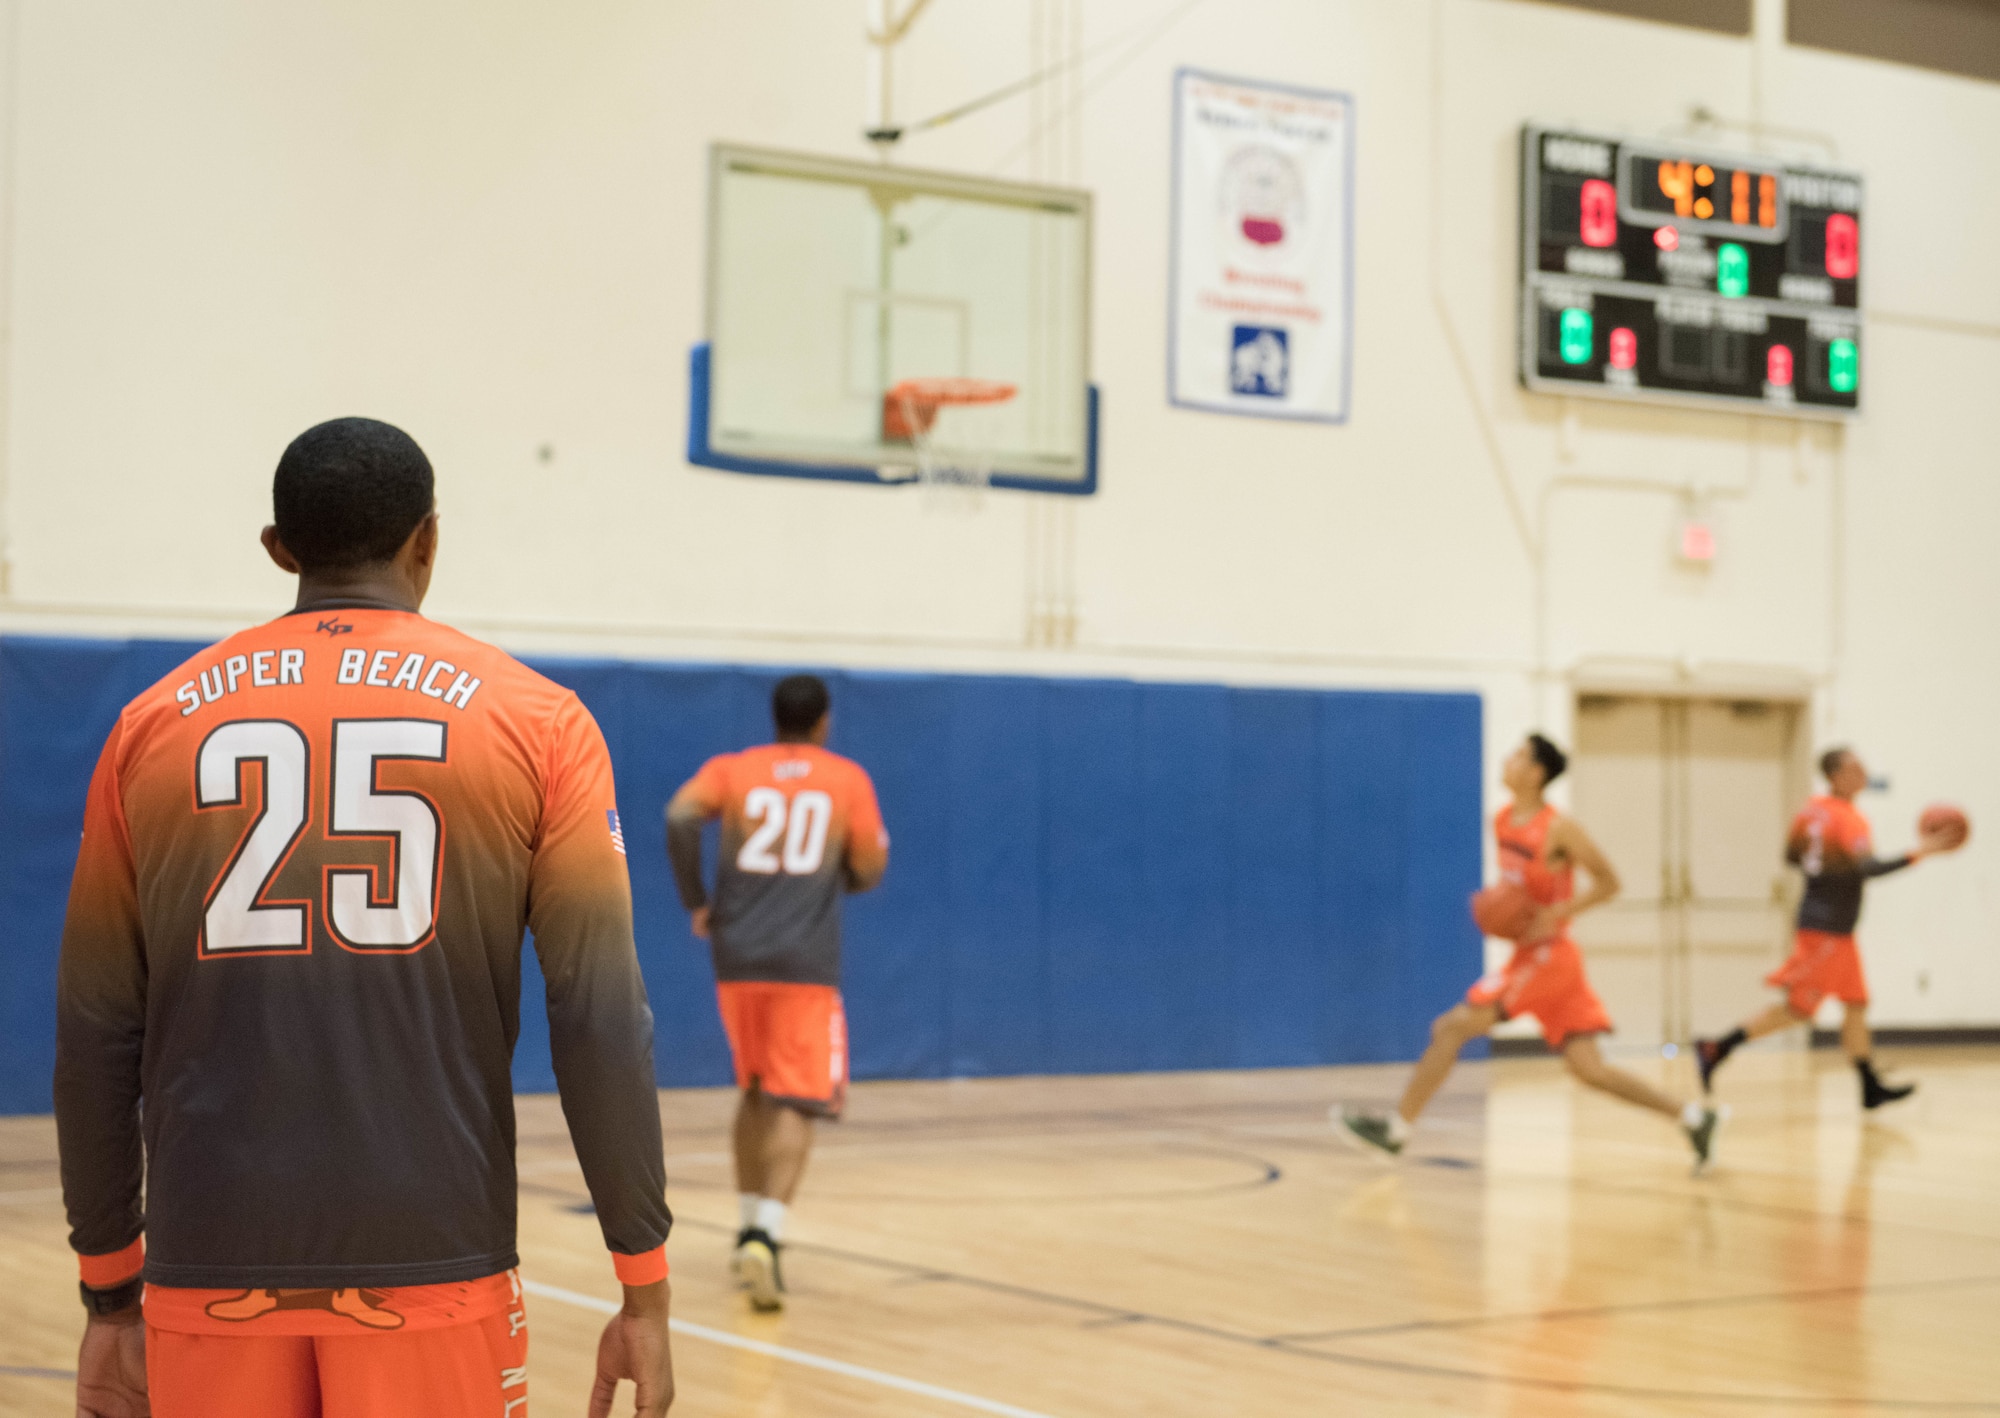 Airman 1st Class Alex Beachum, 366th Logistics Readiness Squadron vehicle operator, participates in a warm up before a basketball game, Aug. 25, 2019, at Mountain Home Air Force Base, Idaho. The Gunfighters faced off with a team made of college players and players who've participated in the National Basketball Association's development league. (U.S. Air Force photo by Senior Airman Tyrell Hall)